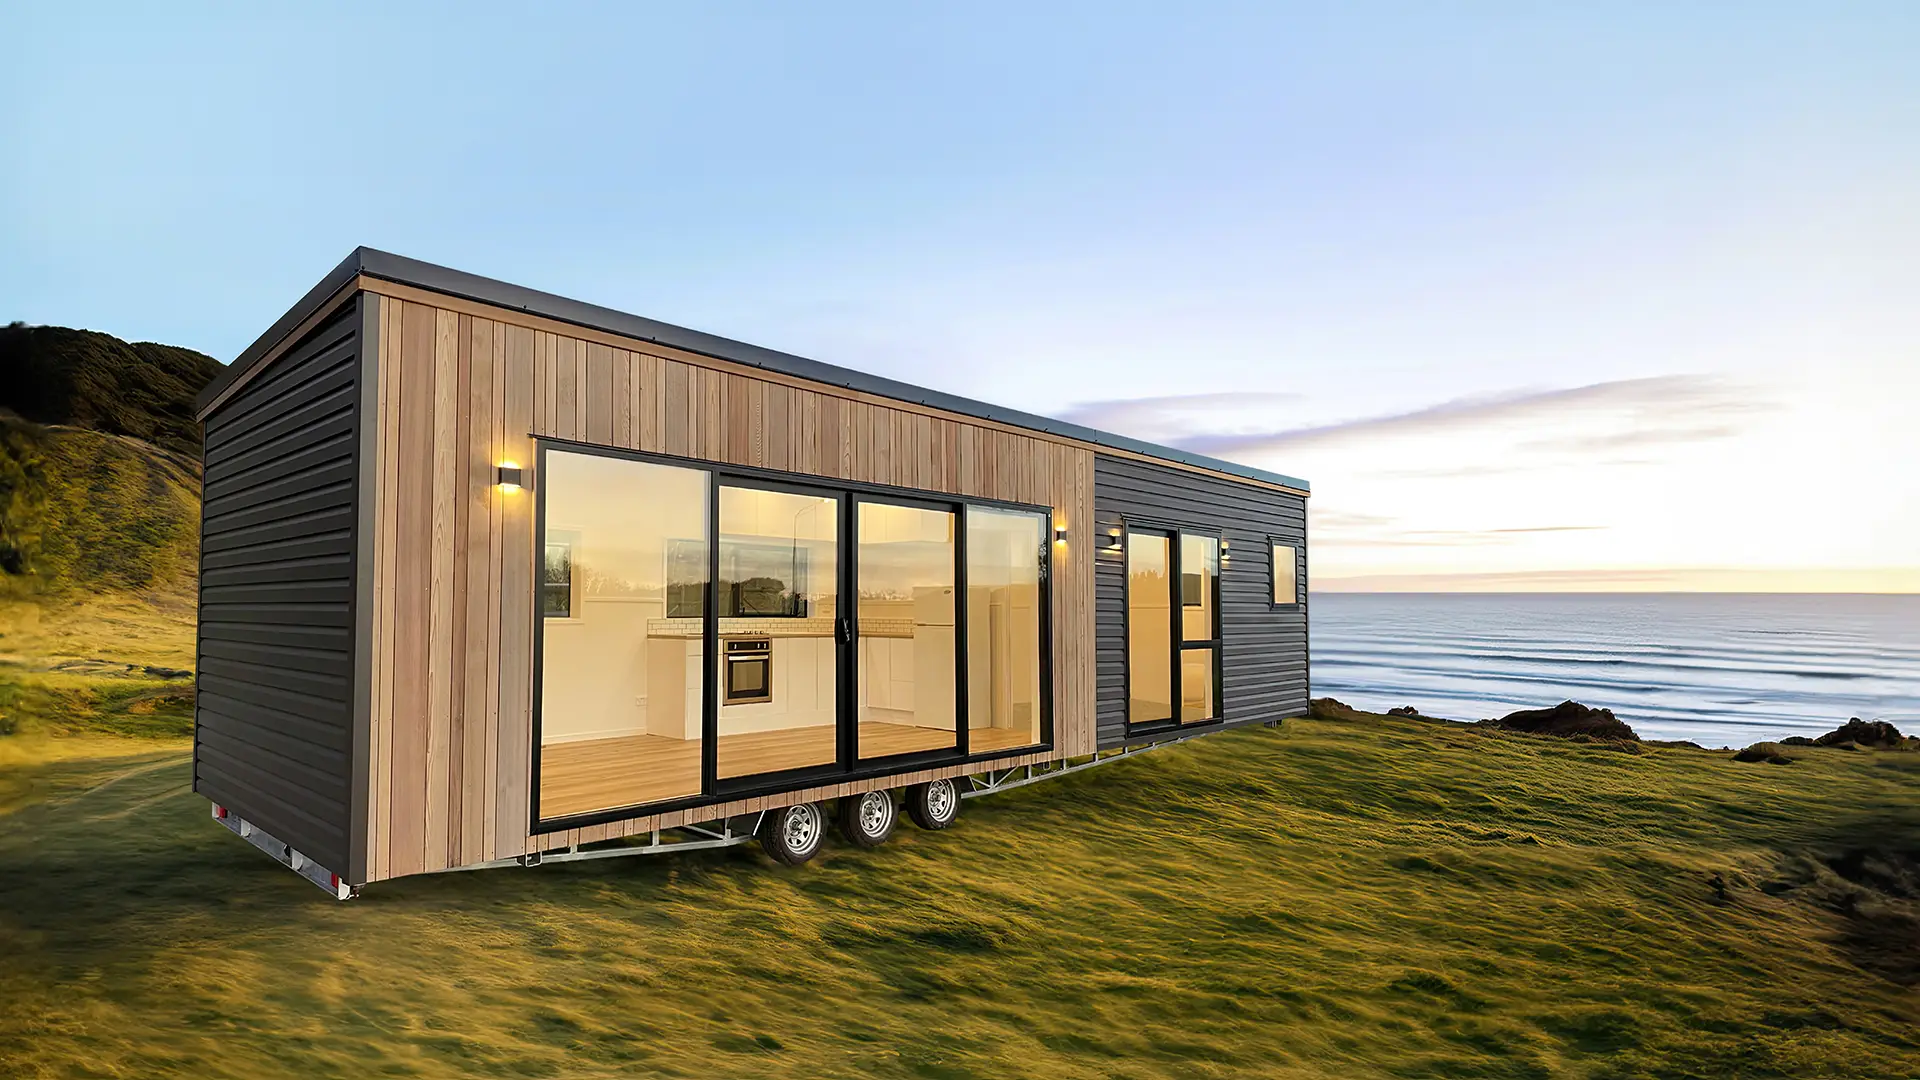 ’Haven’ by Absolute Tiny Houses, is a custom-designed container home built on a trailer.